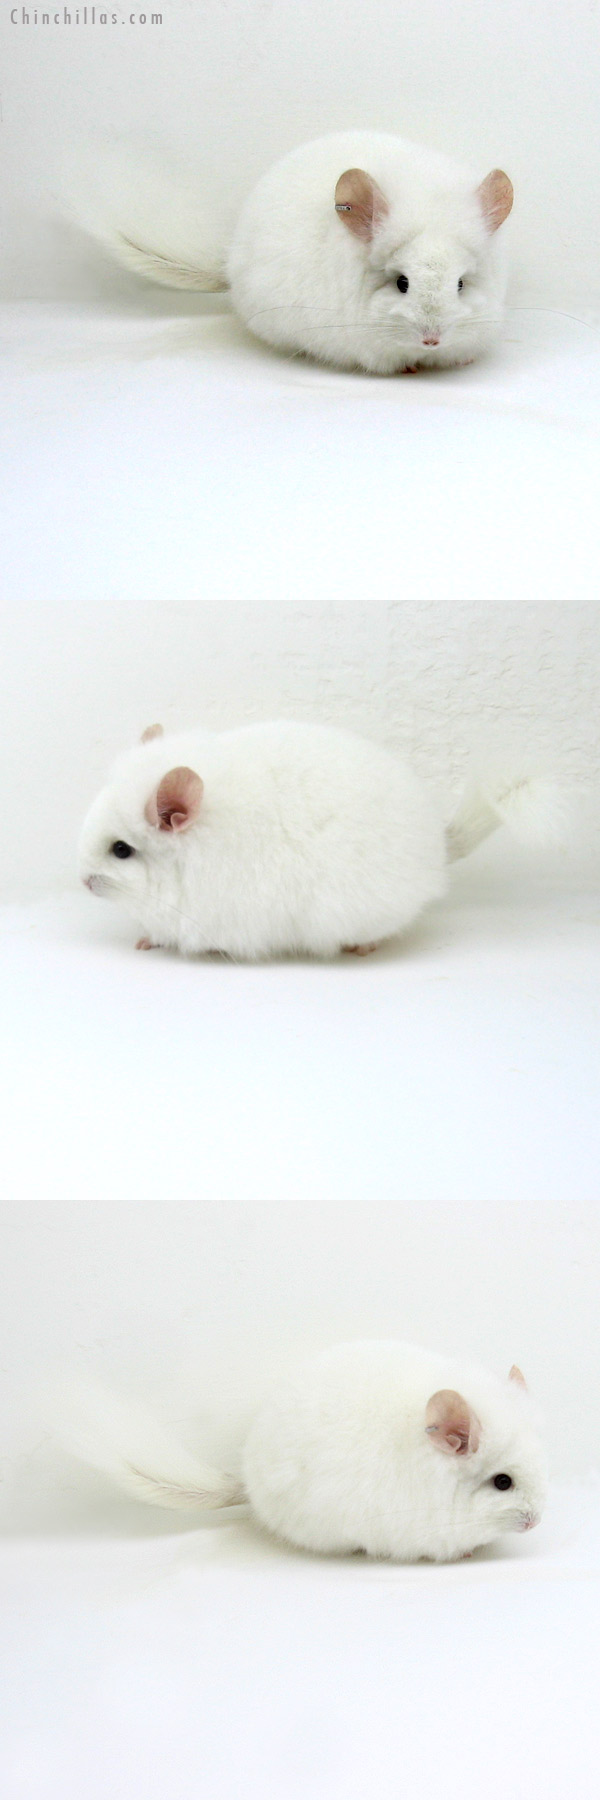 Chinchilla or related item offered for sale or export on Chinchillas.com - 12060 Exceptional, Blocky Pink White Royal Persian Angora Female Chinchilla